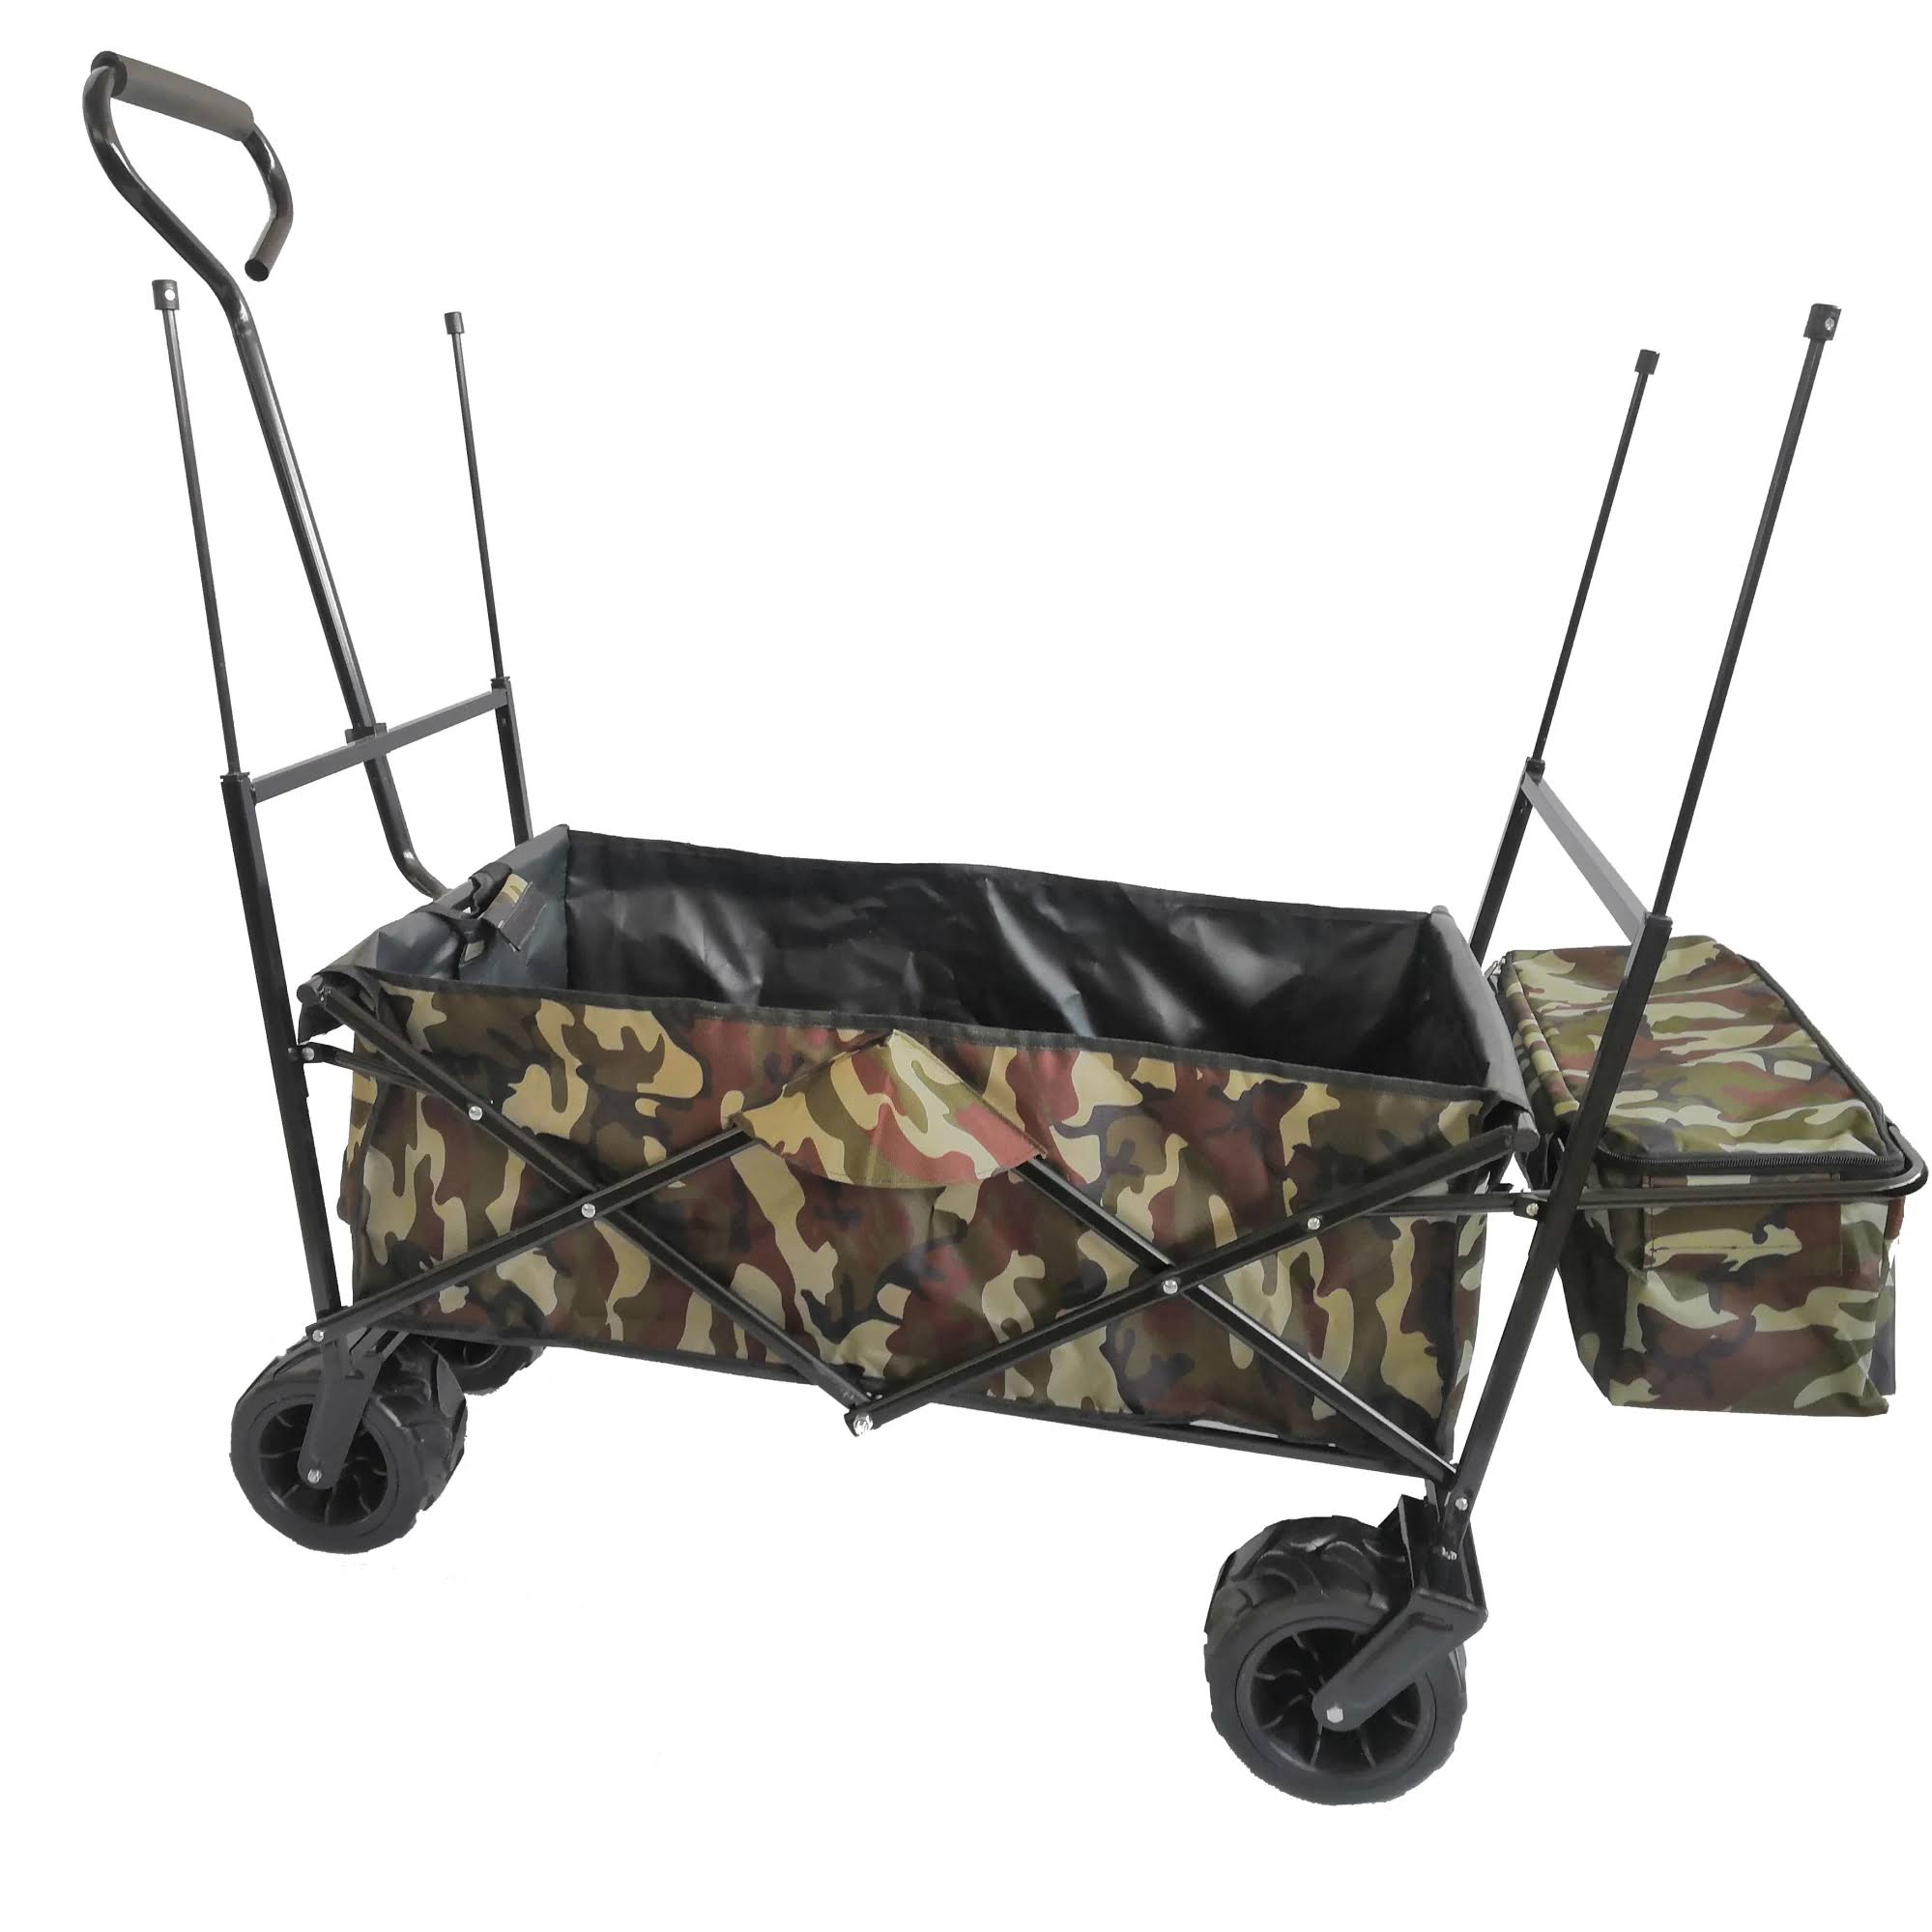 Happybuy Happbuy Extra Large Collapsible Garden Cart with Removable Canopy Folding Wagon Utility Carts with Wheels and Rear Storage Wagon Cart for Gar